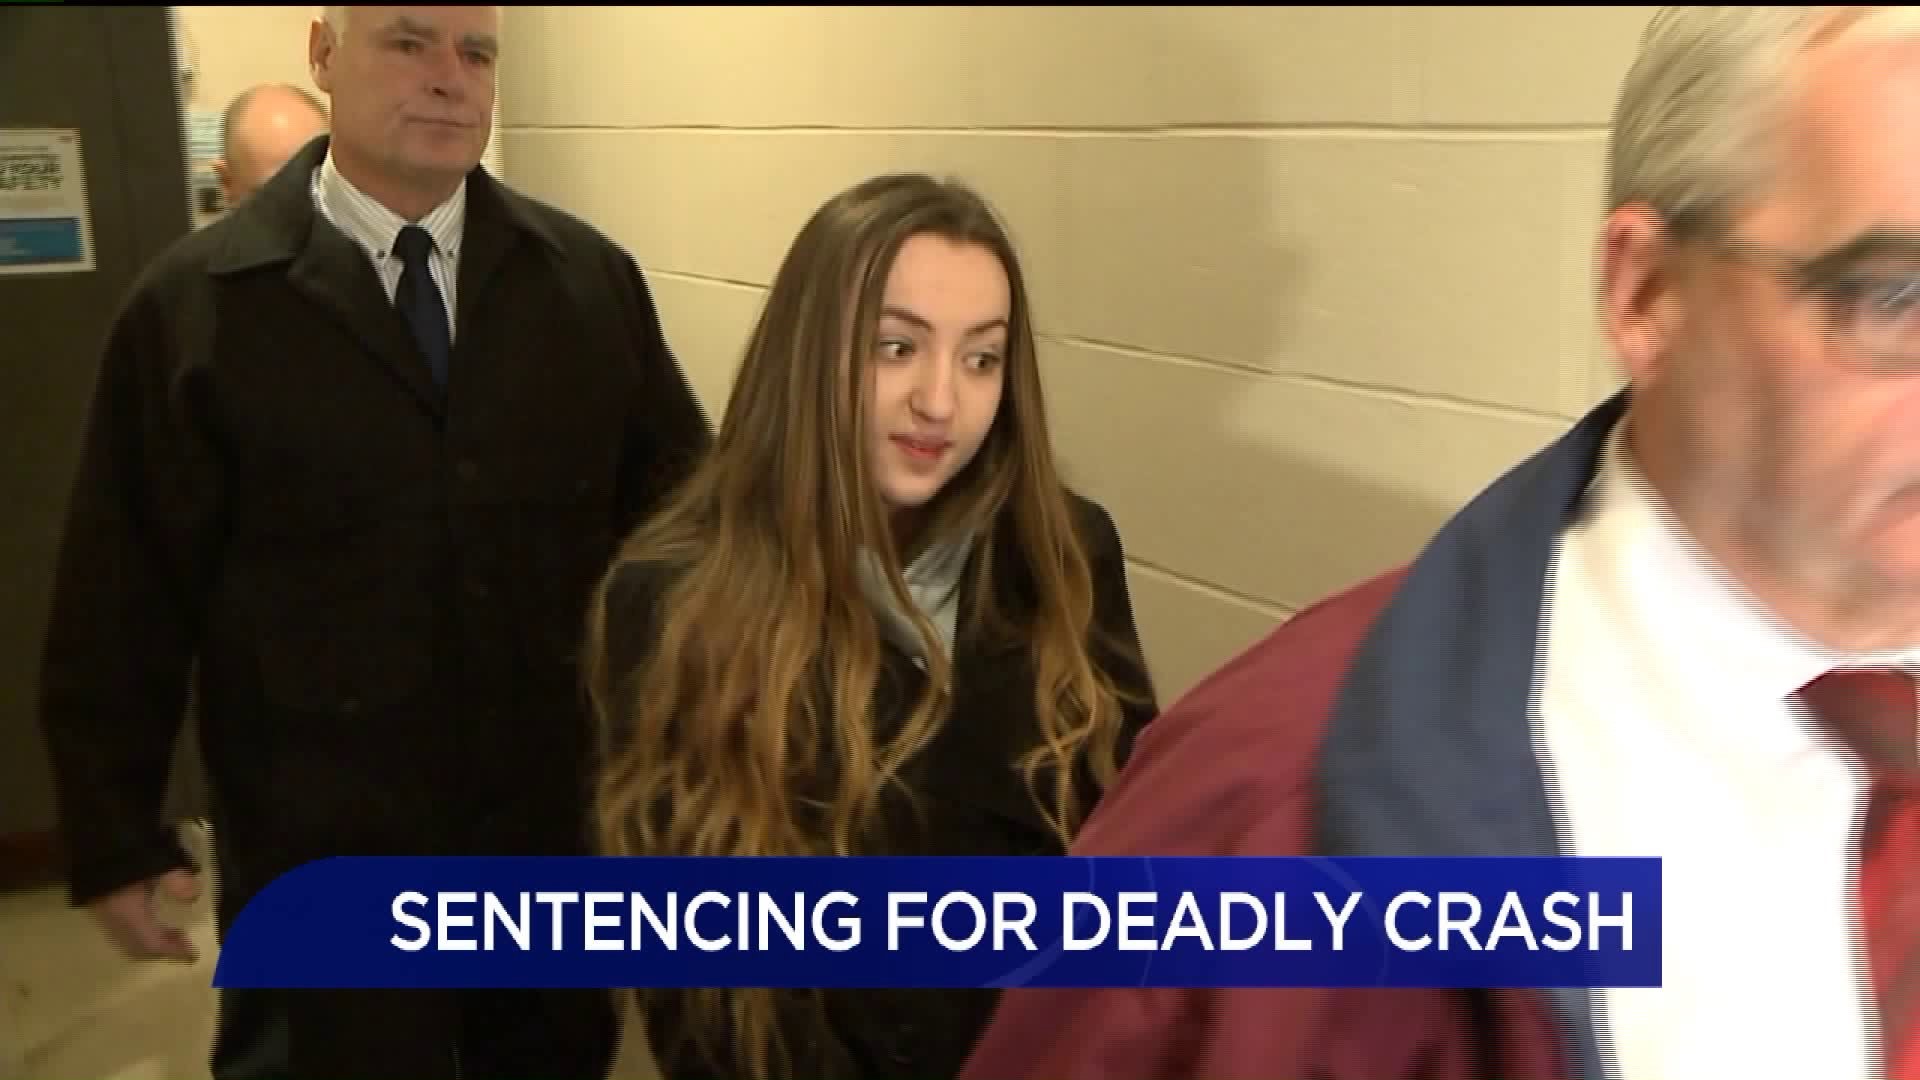 State Prison Term for Deadly DUI Crash